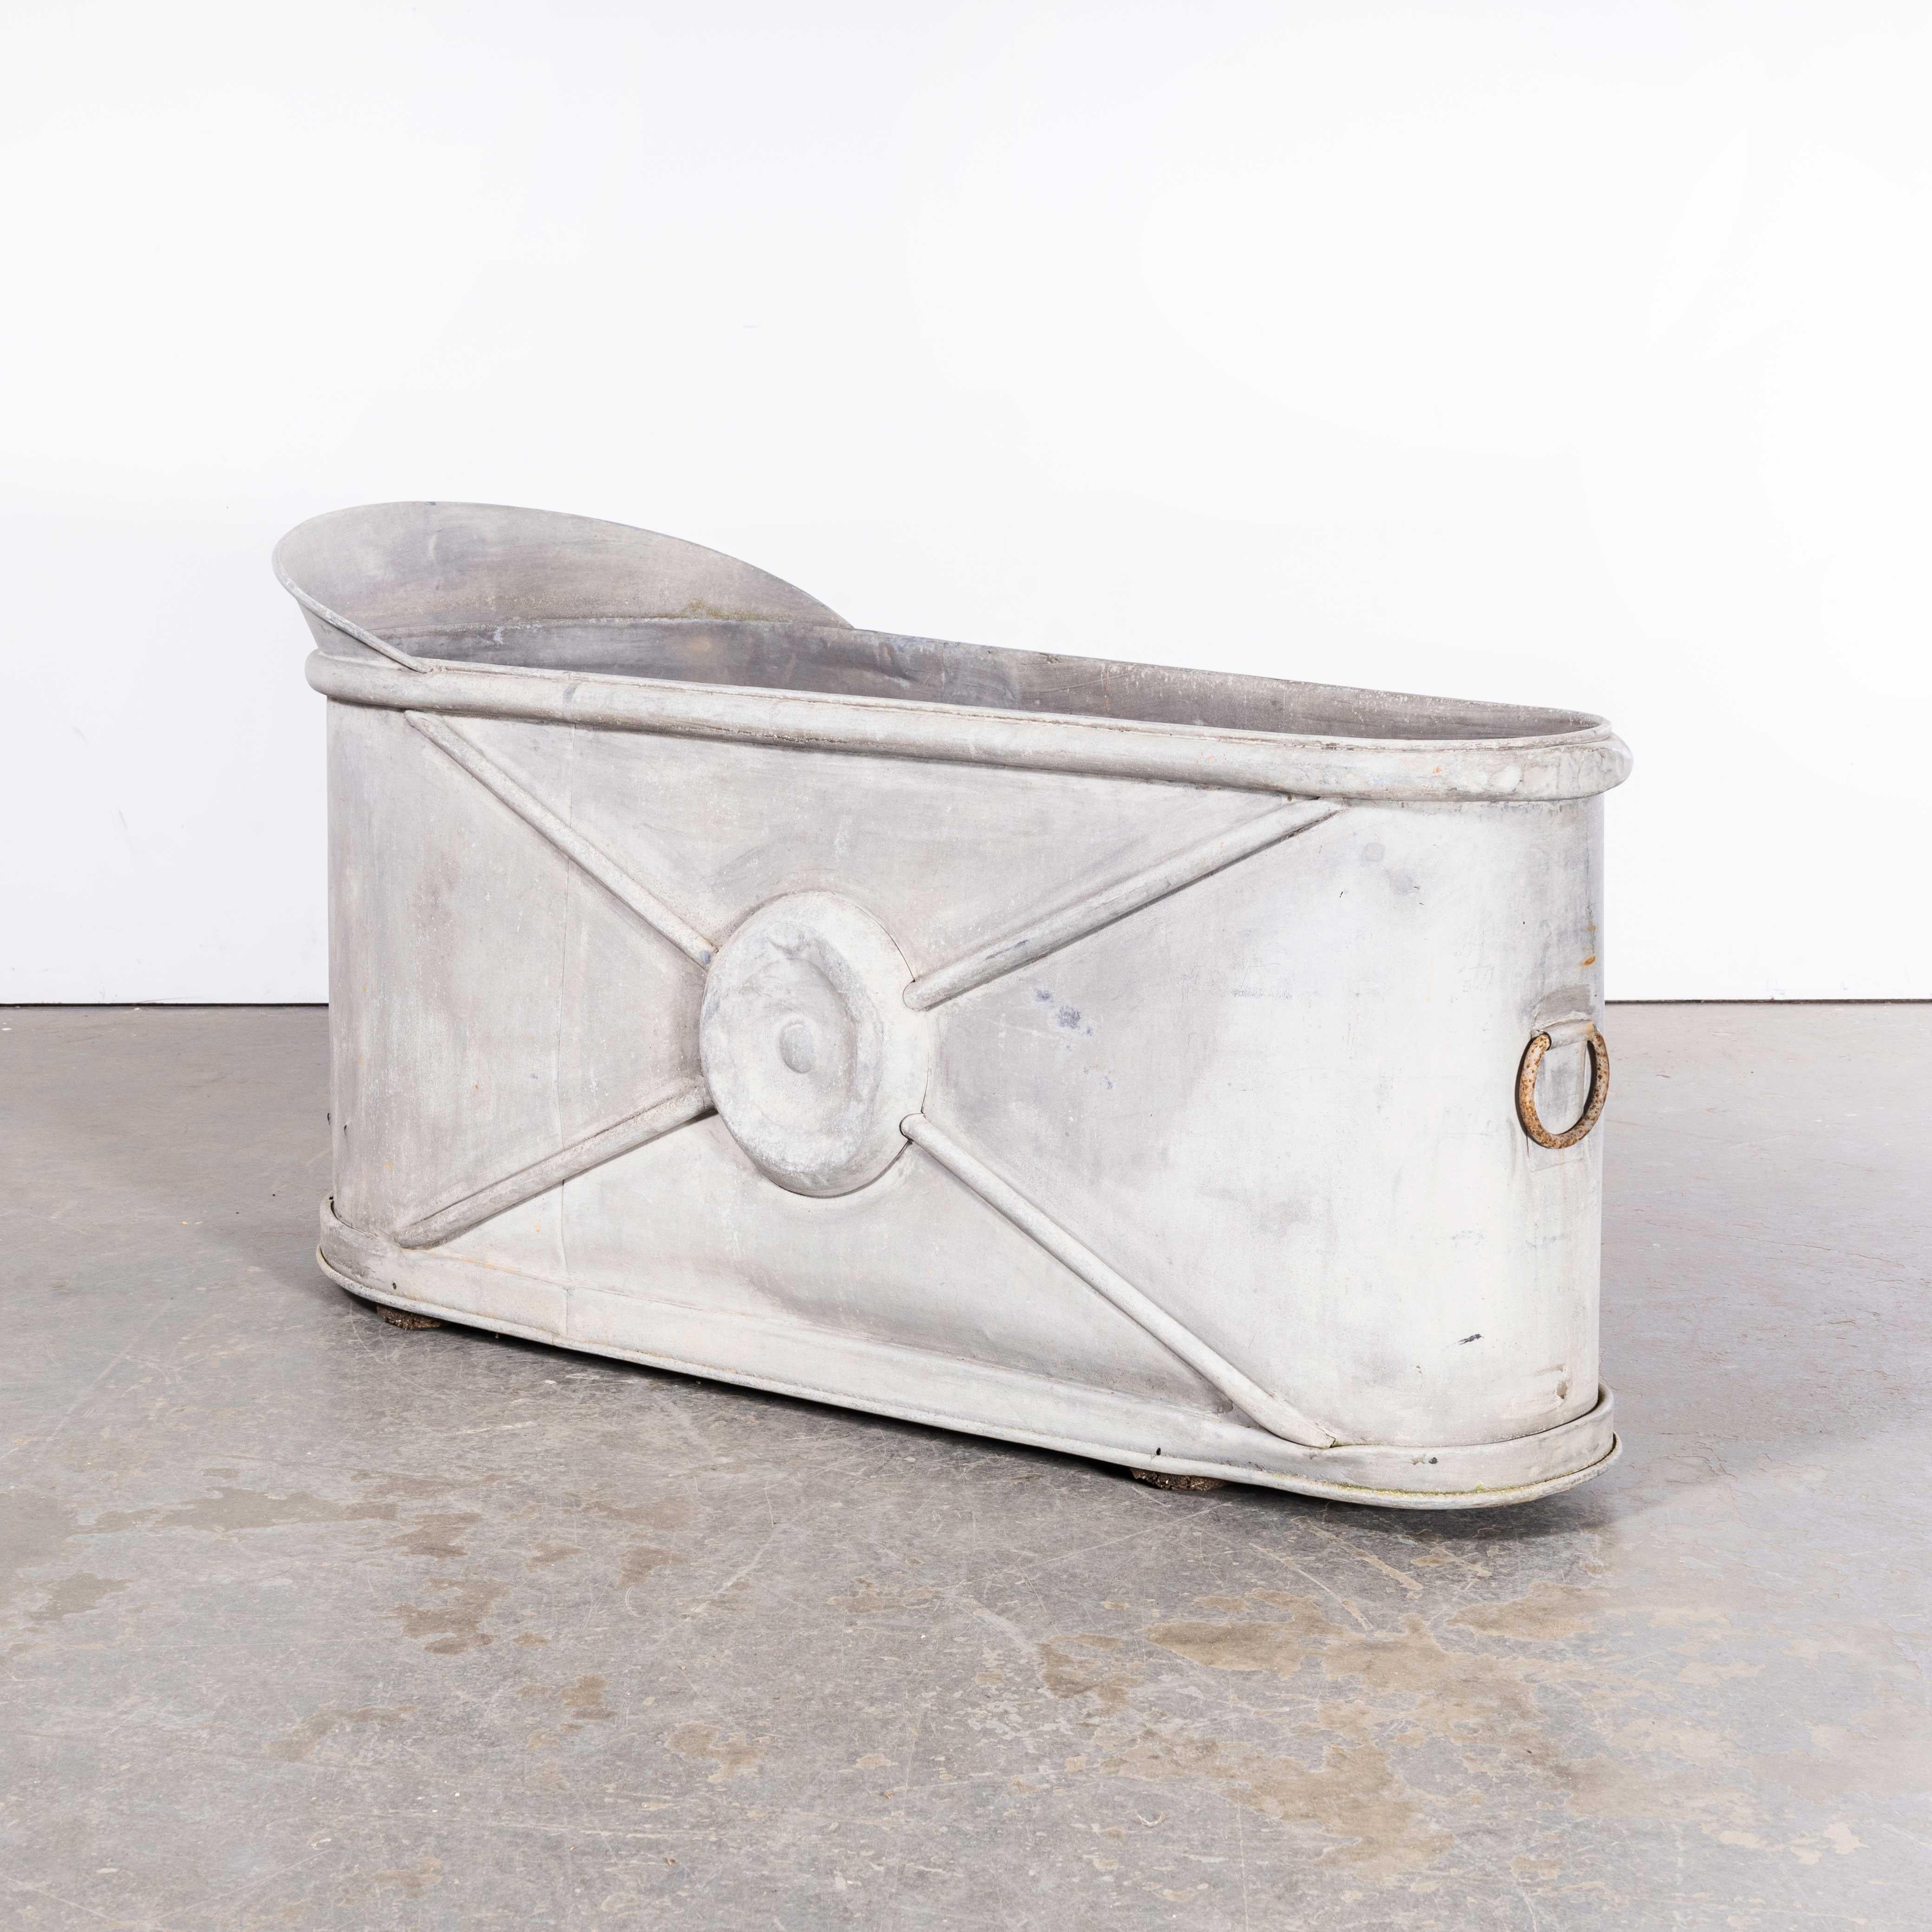 1940’s Original French Zinc – Galvanised Bath – Planter
1940’s Original French Zinc – Galvanised Bath – Planter. Good example of an early original French zinc bath that makes a practical planter. The bath features excellent pressed detail and